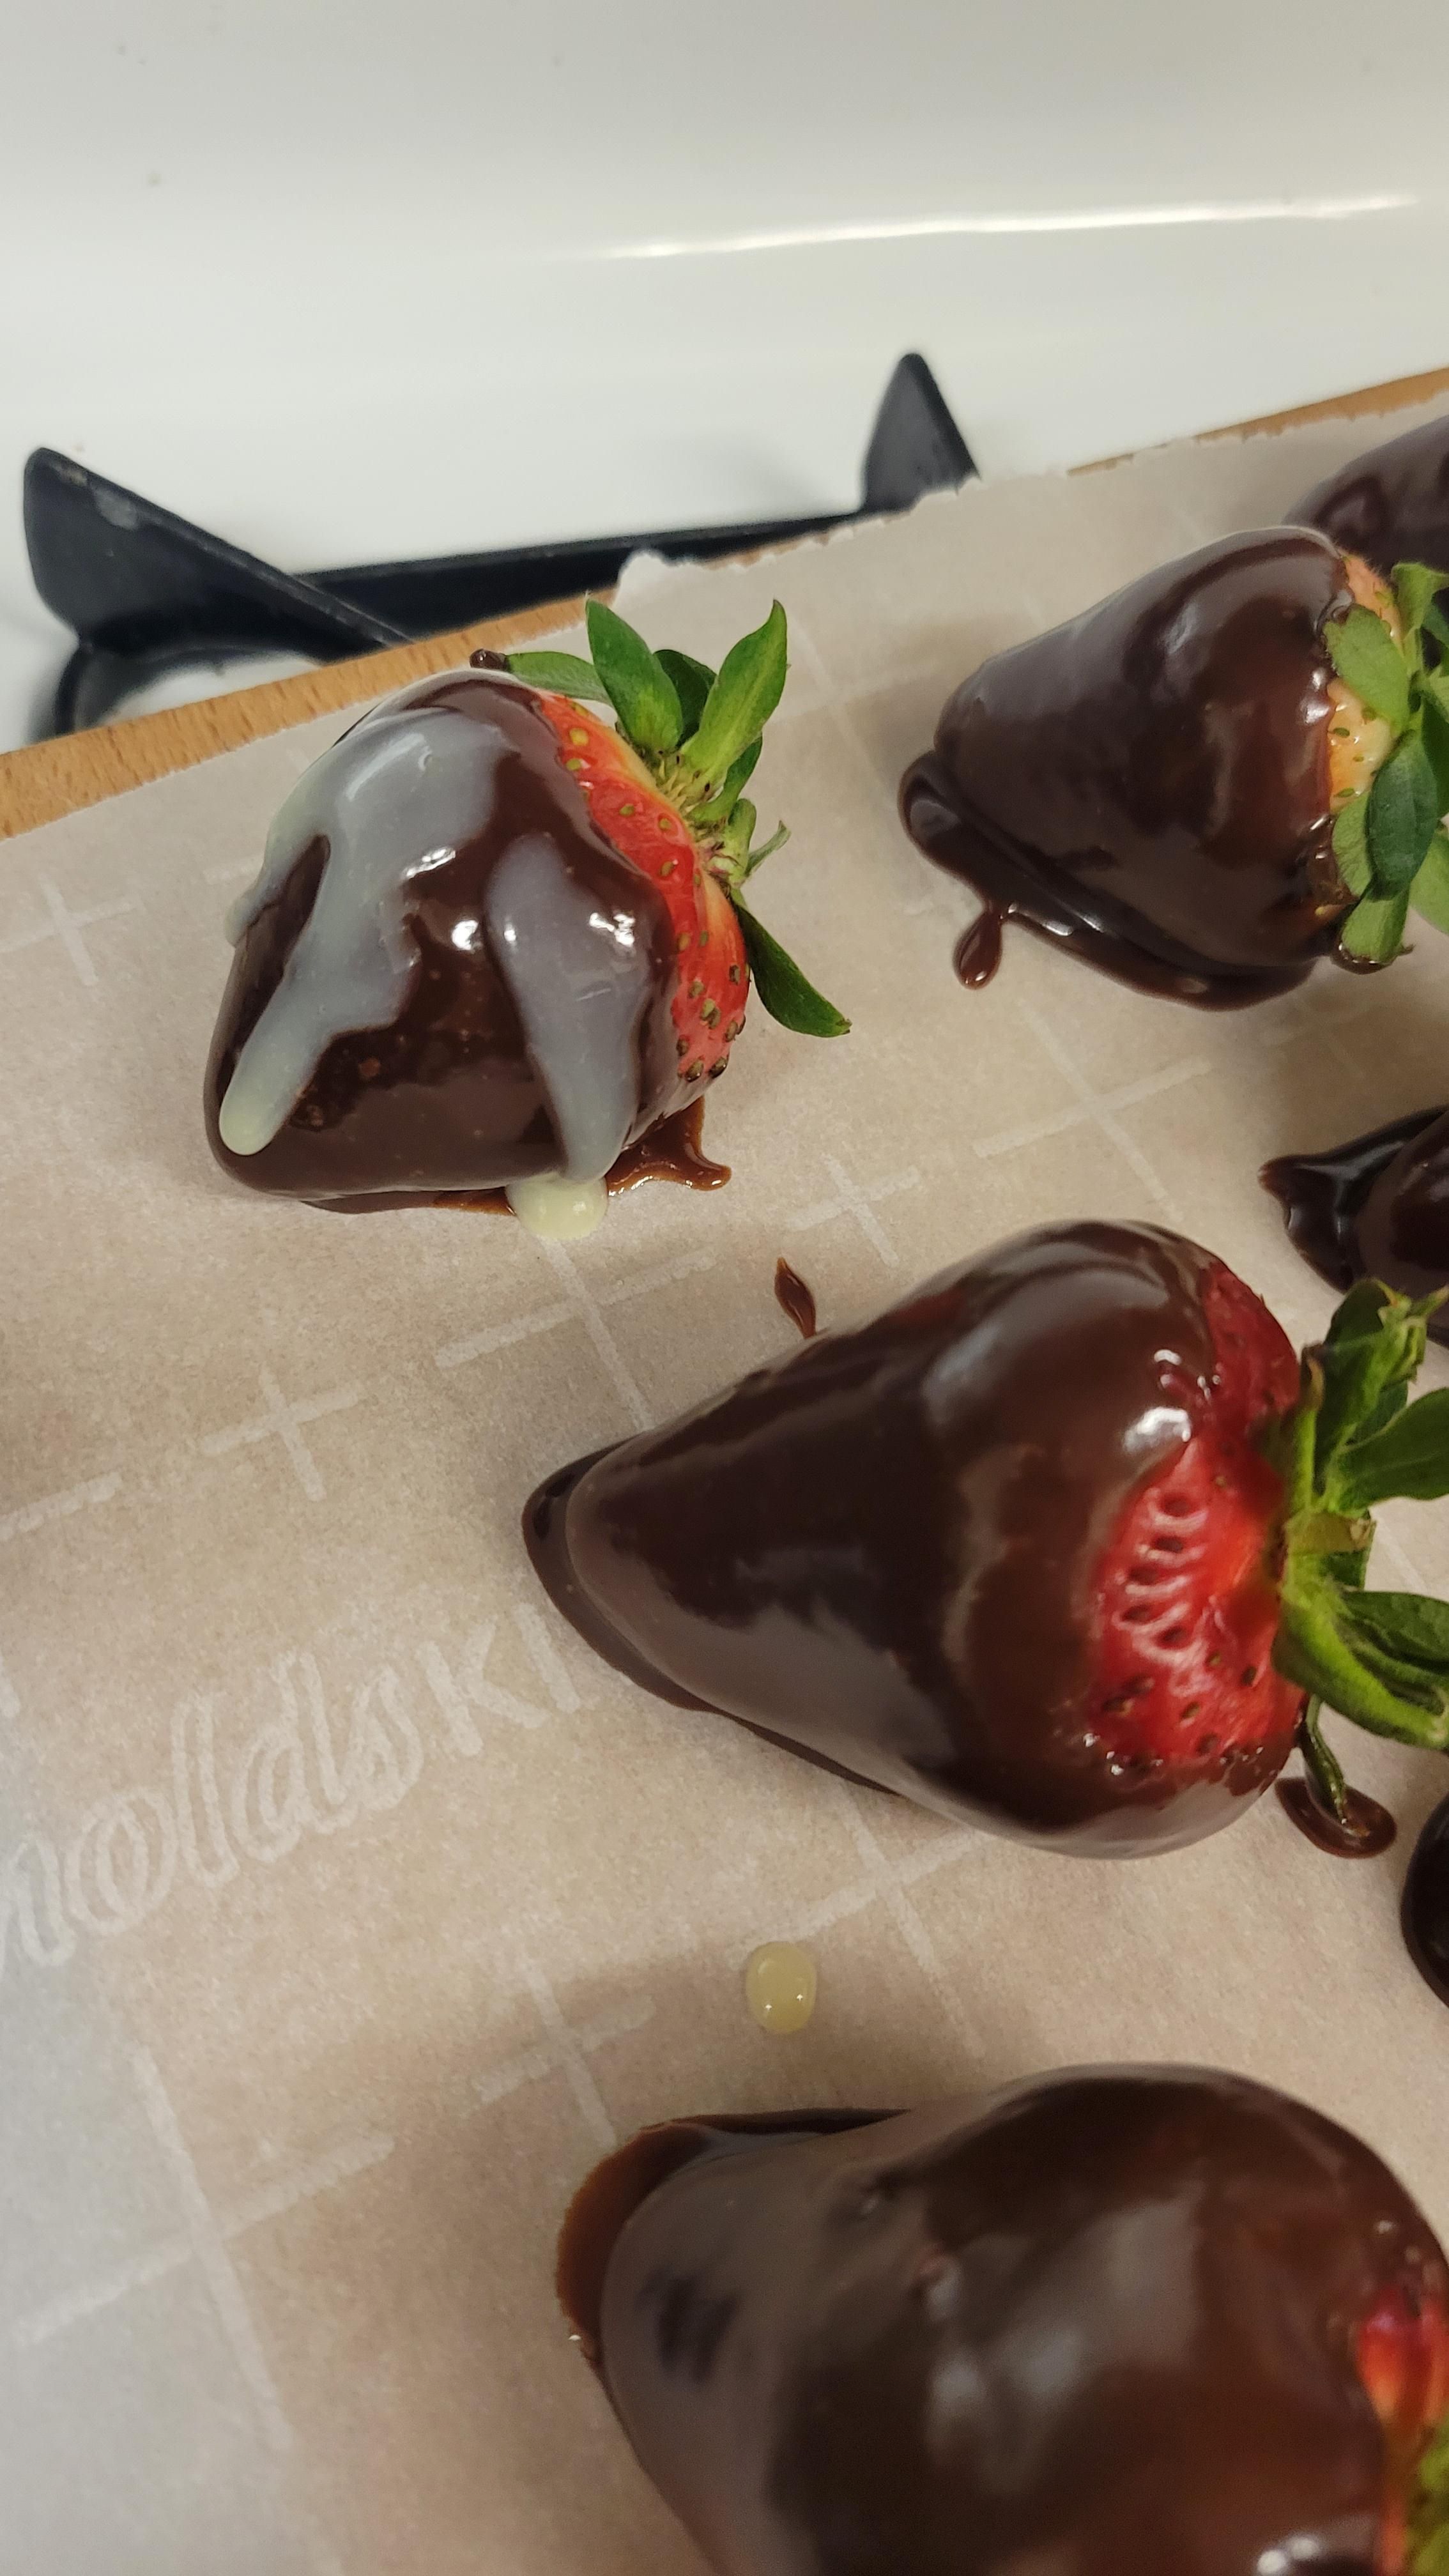 I tried to make milk chocolate covered strawberries with white chocolate drizzle on top, but my white chocolate turned out a bit watery, so now my test strawberry looks... violated.